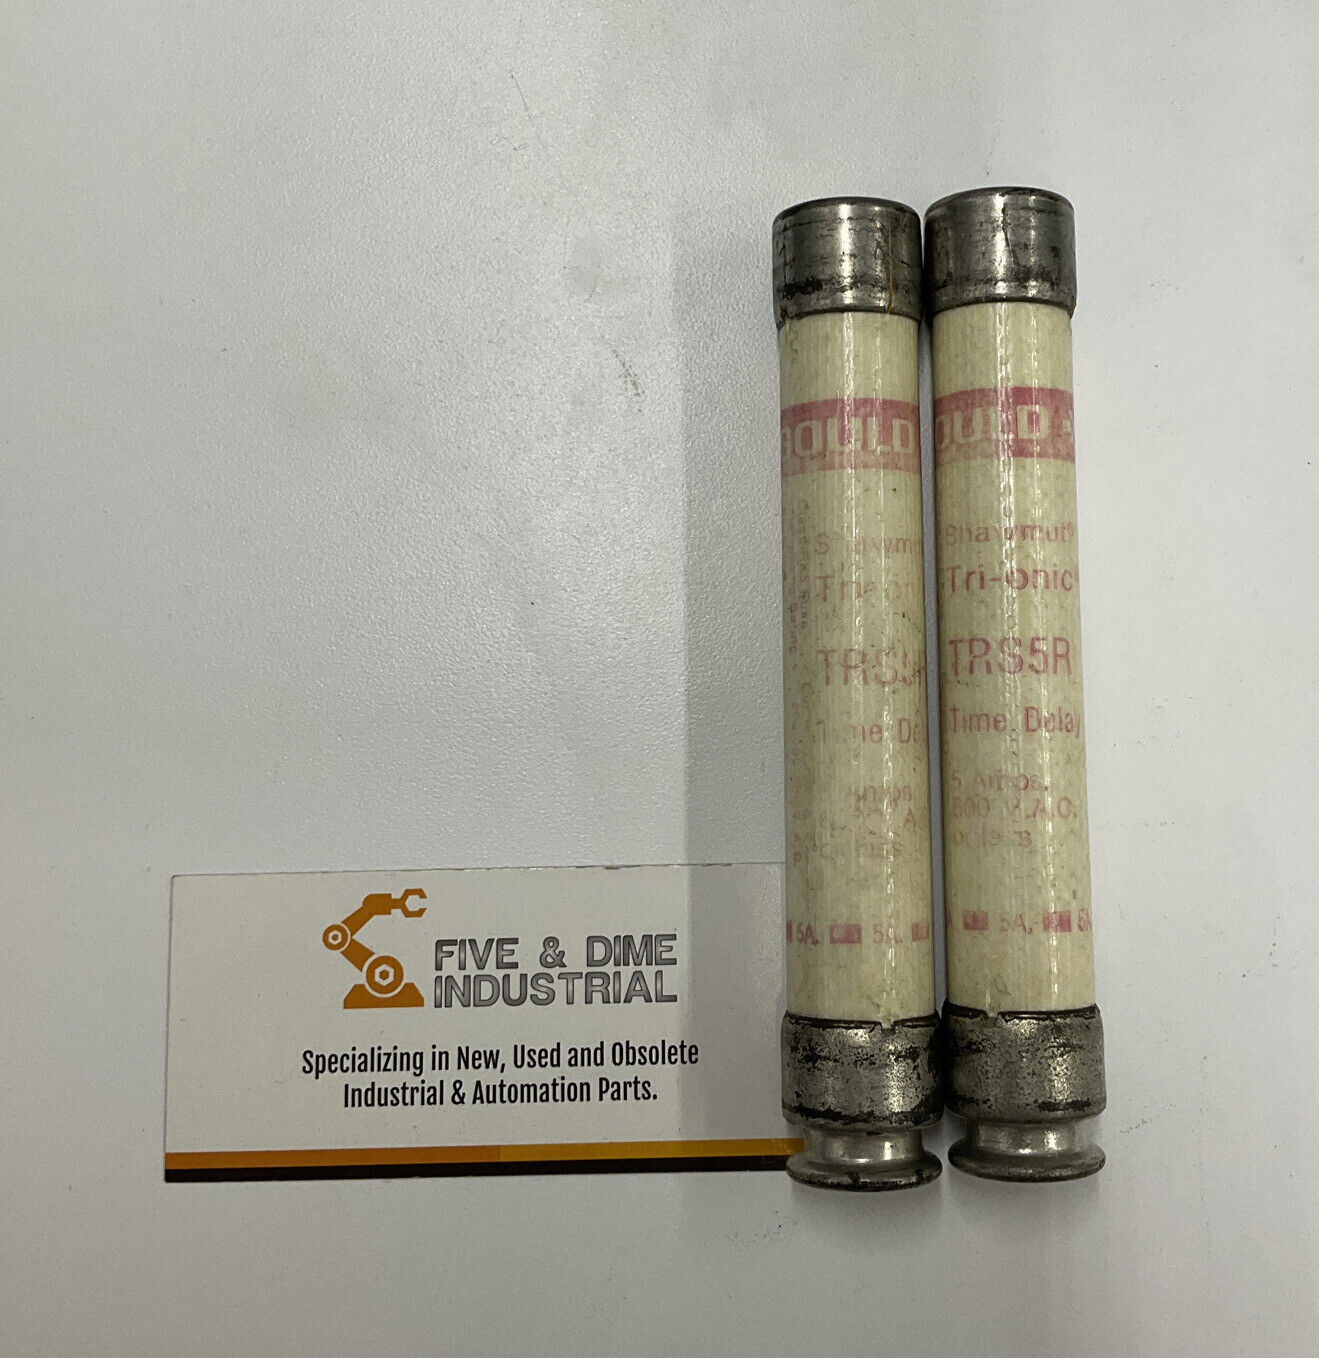 Gould Shawmut Tri-Onic TRS5R Lot of 2  Fuse Time Delay (CL113)